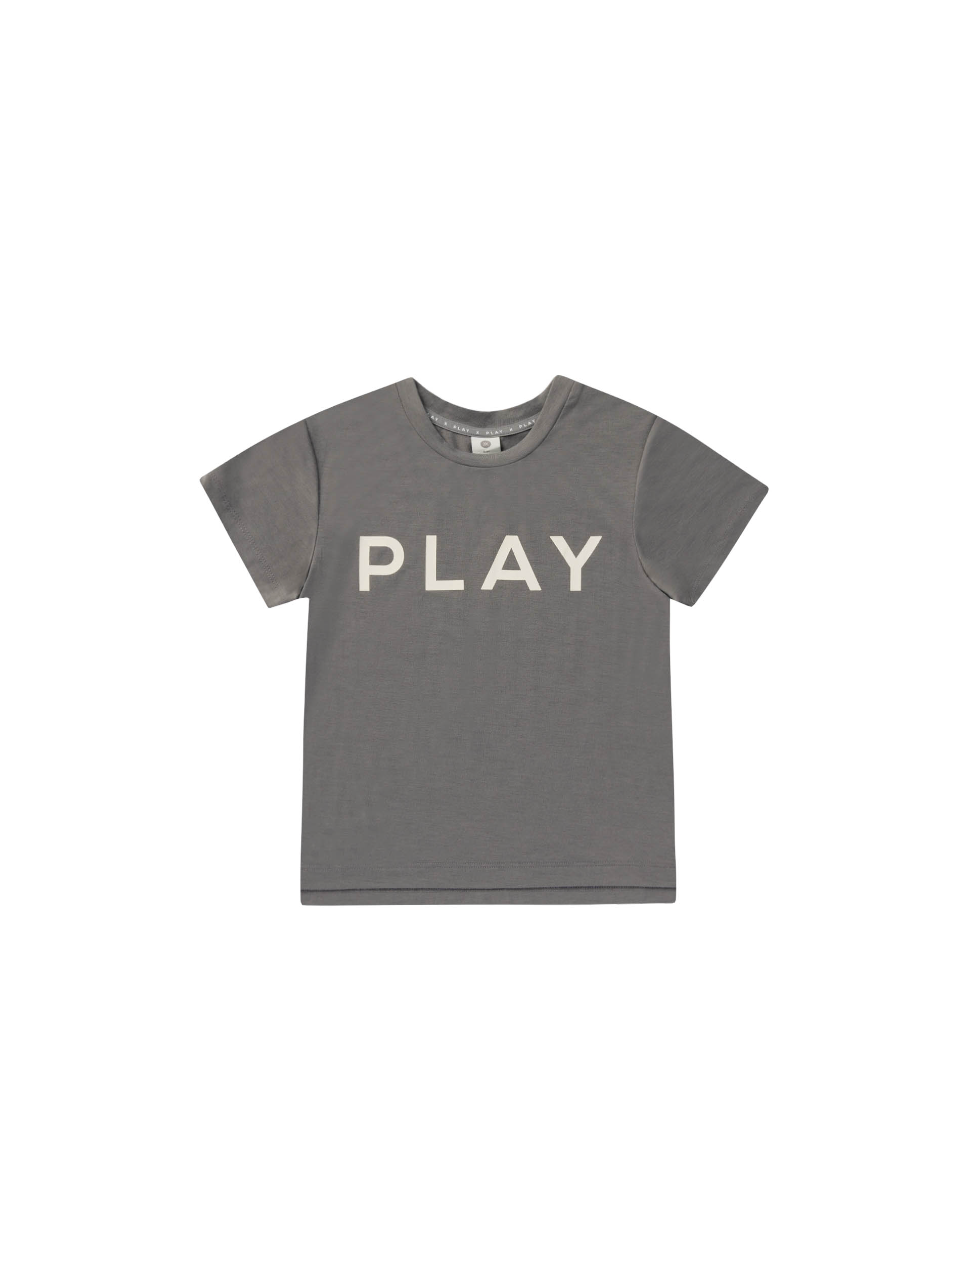 Play x Play Cove Essential Tee -Dove Grey